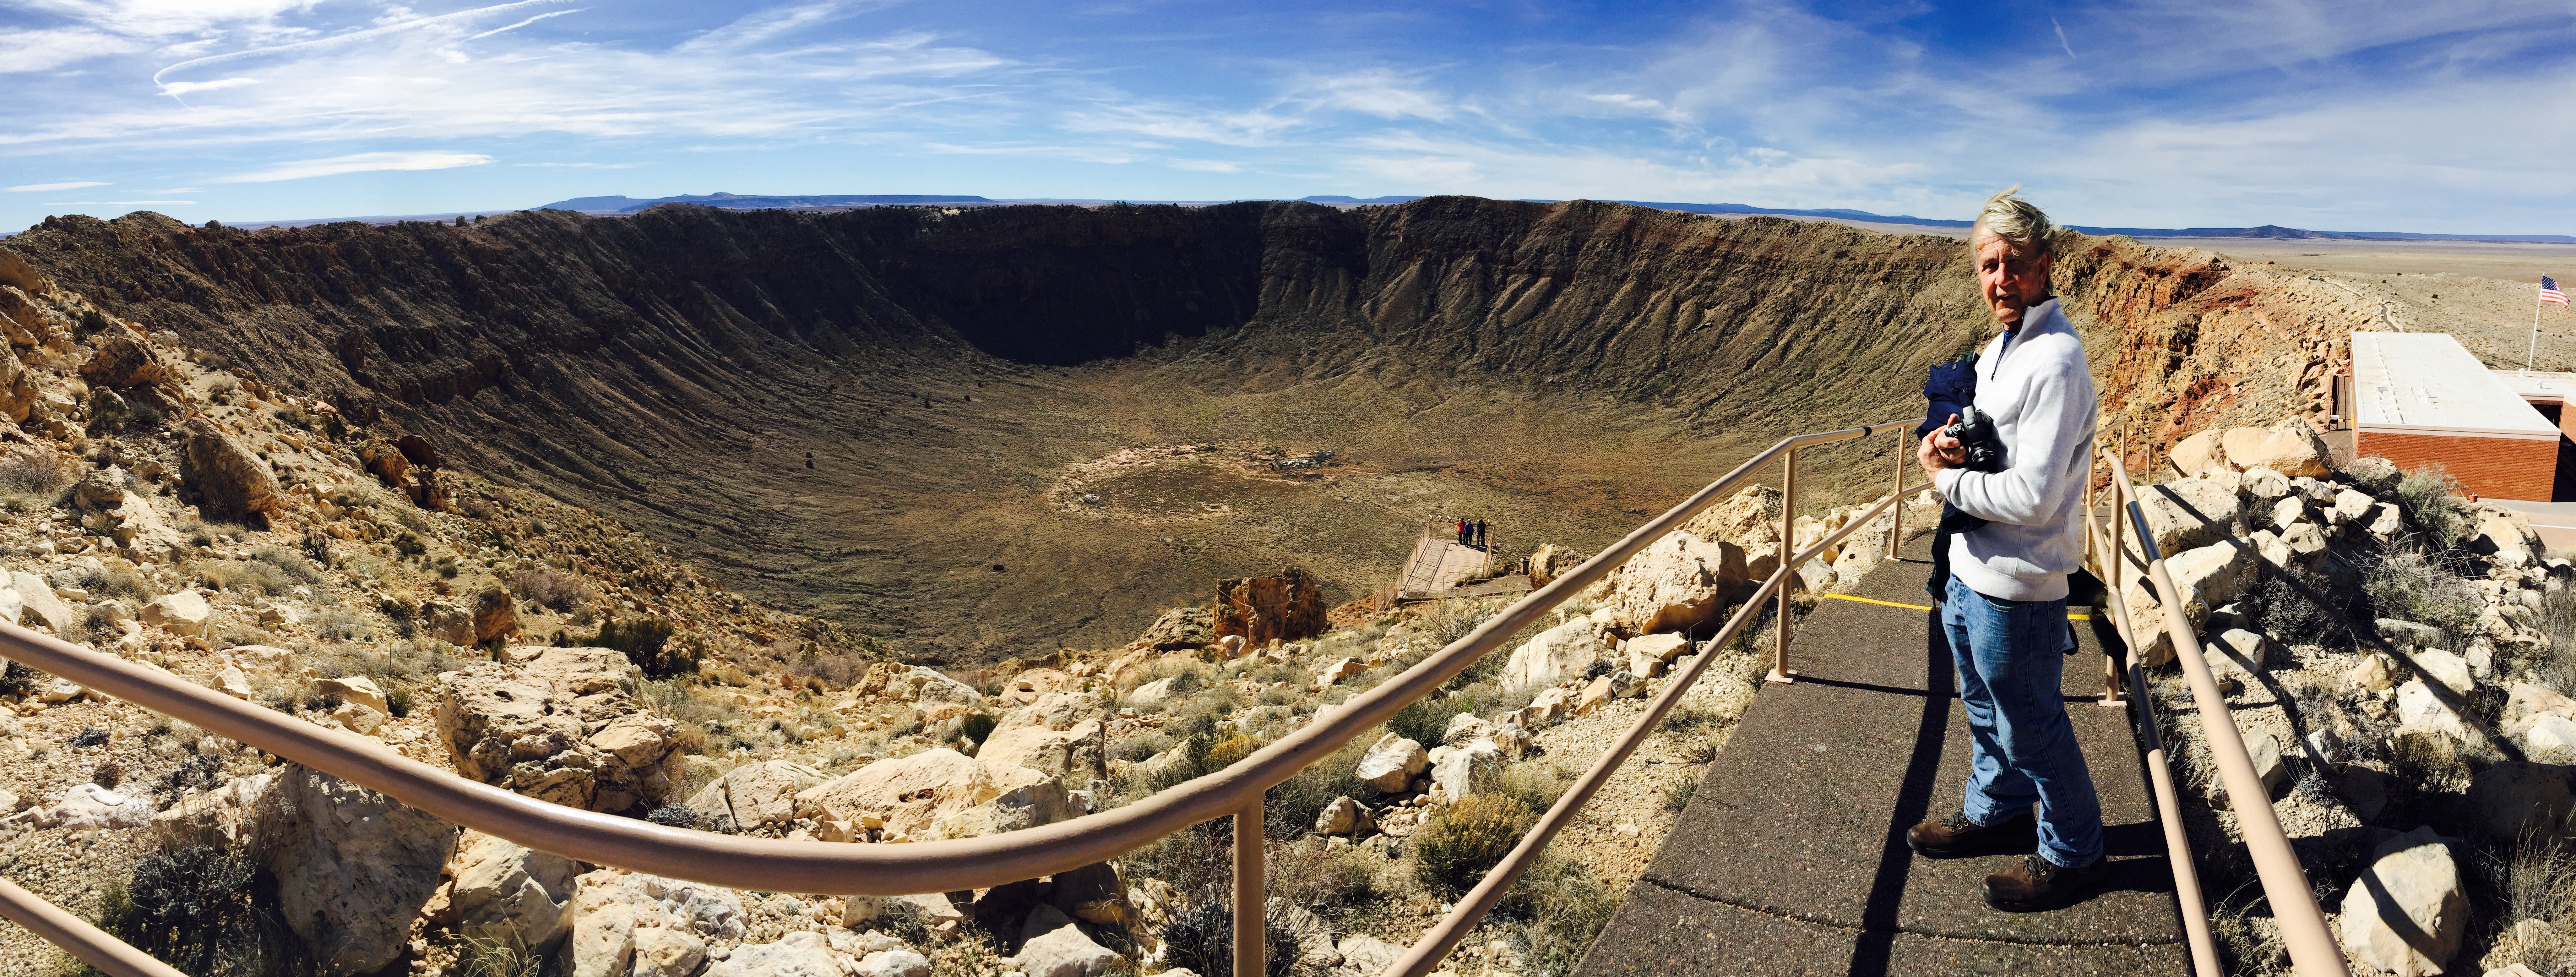 are dogs allowed in privately held meteor crater arizona